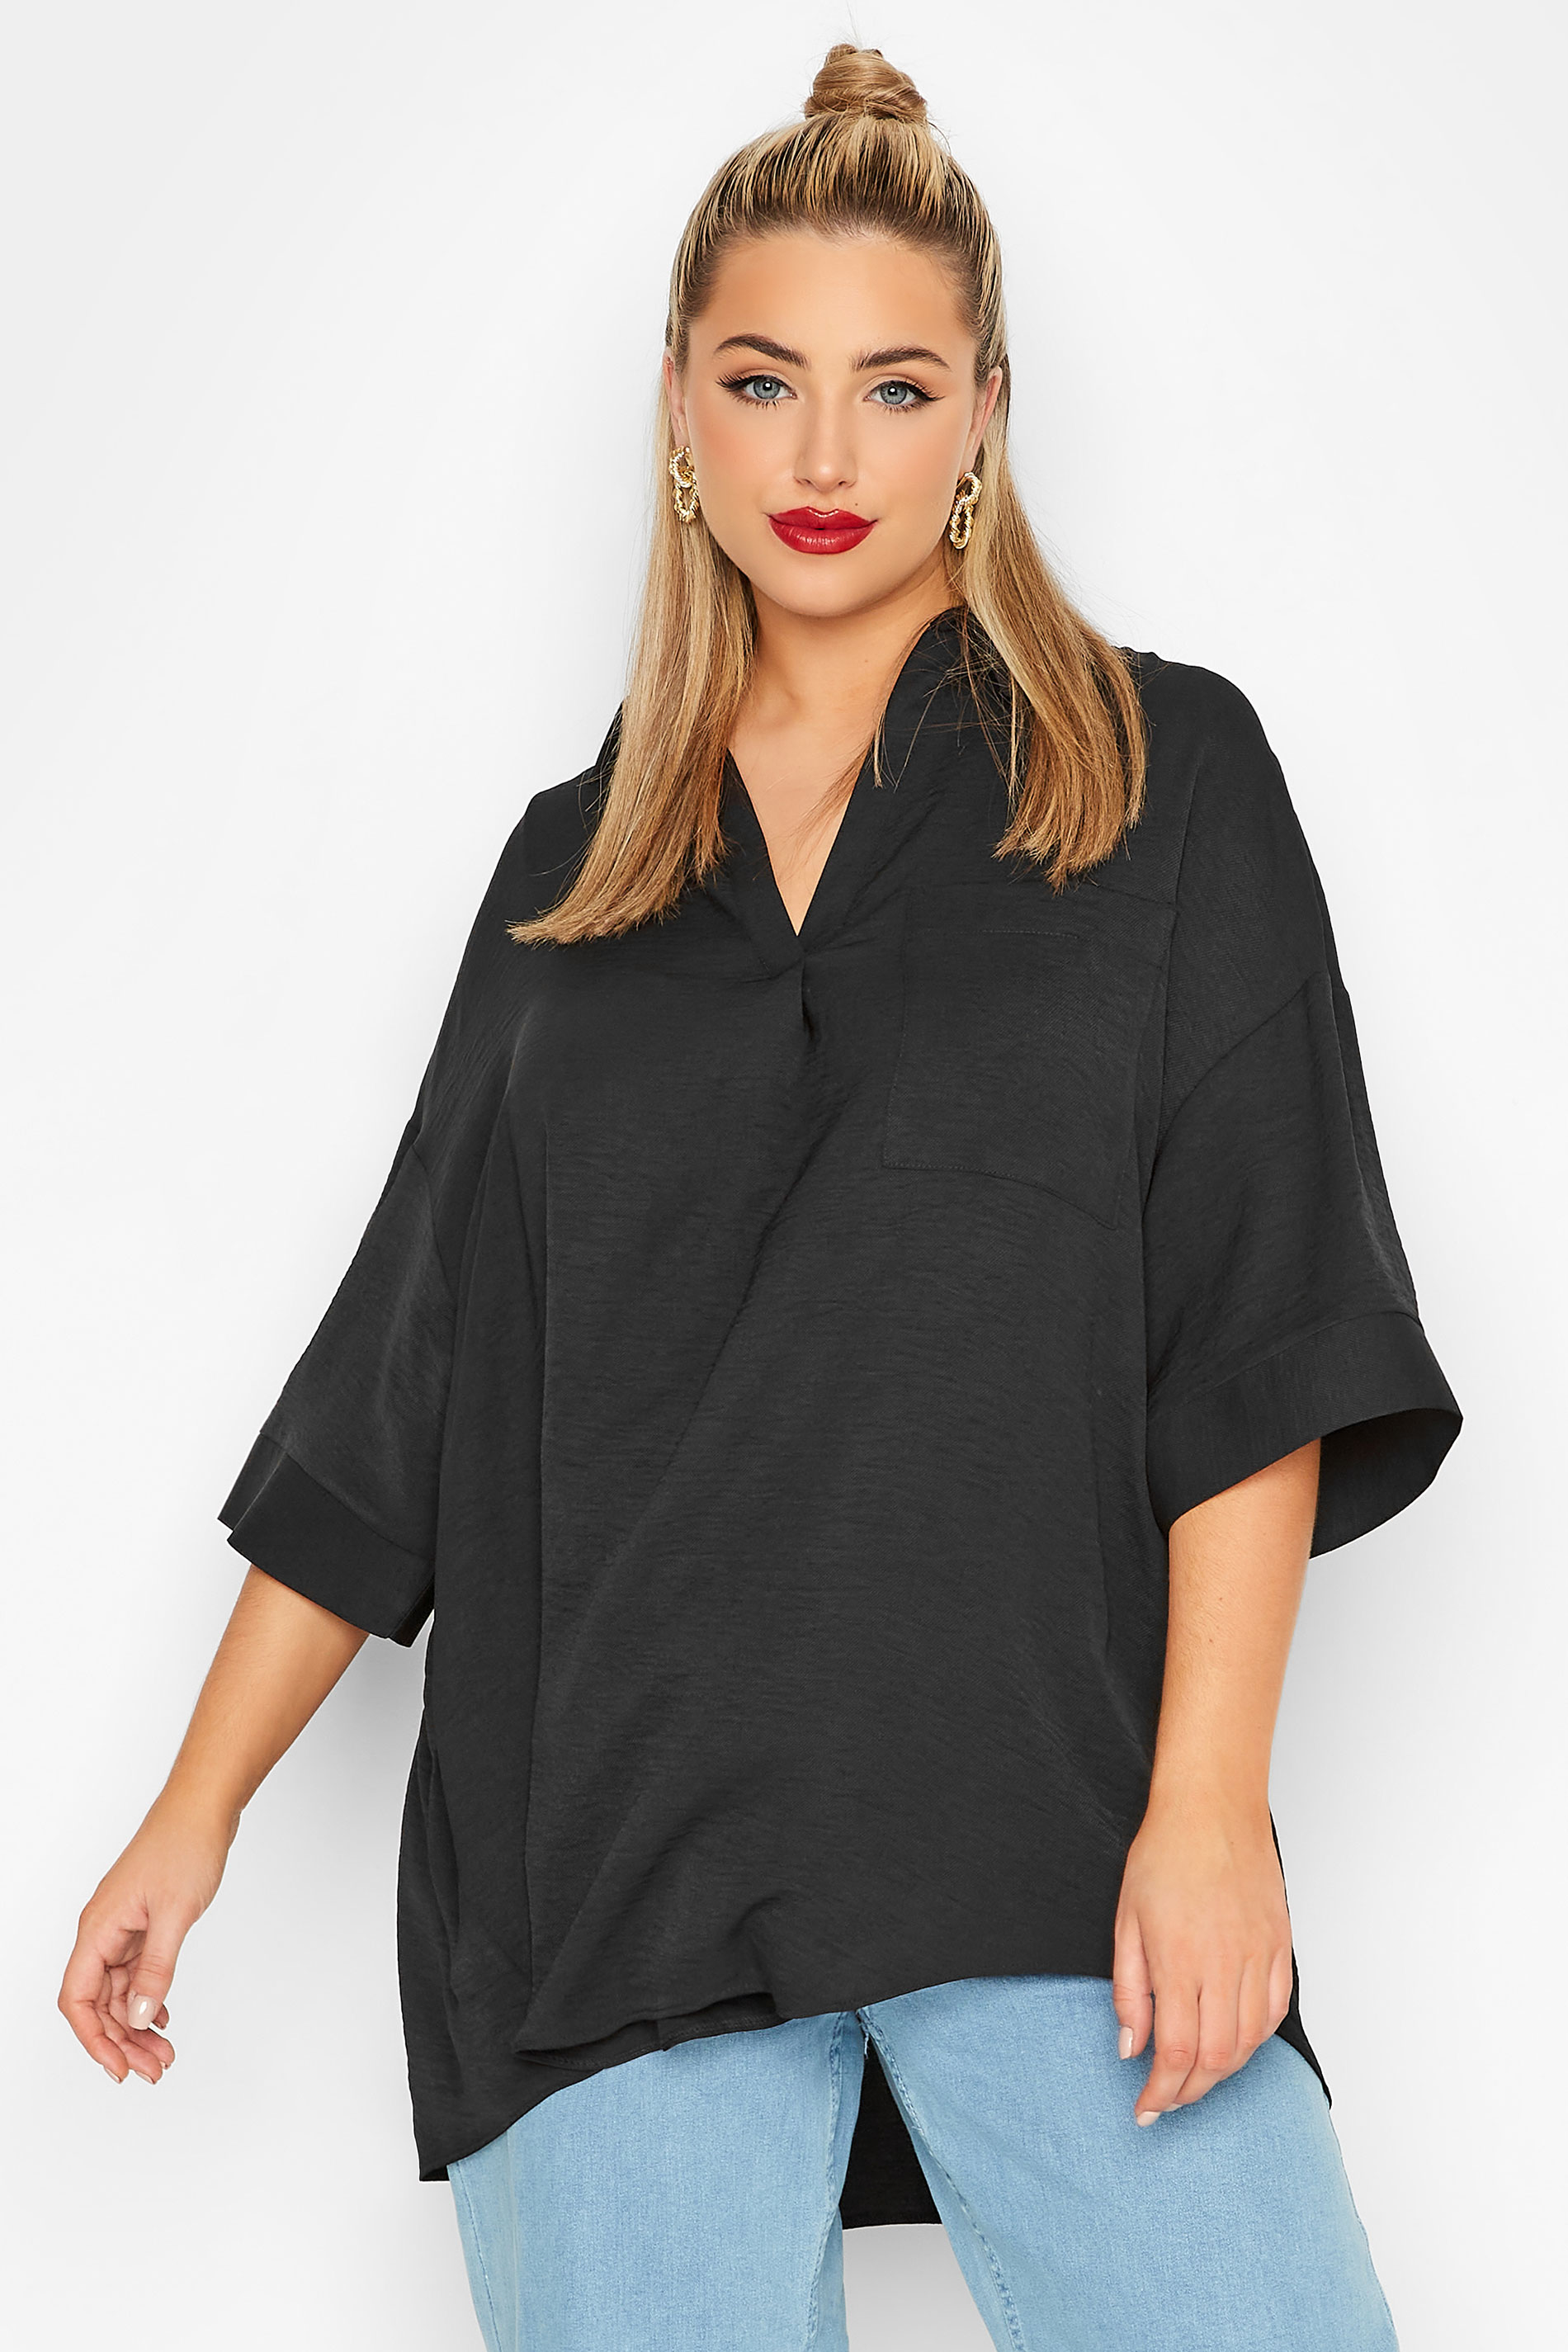 LIMITED COLLECTION Plus Size Black Pleated Front Top | Yours Clothing  2